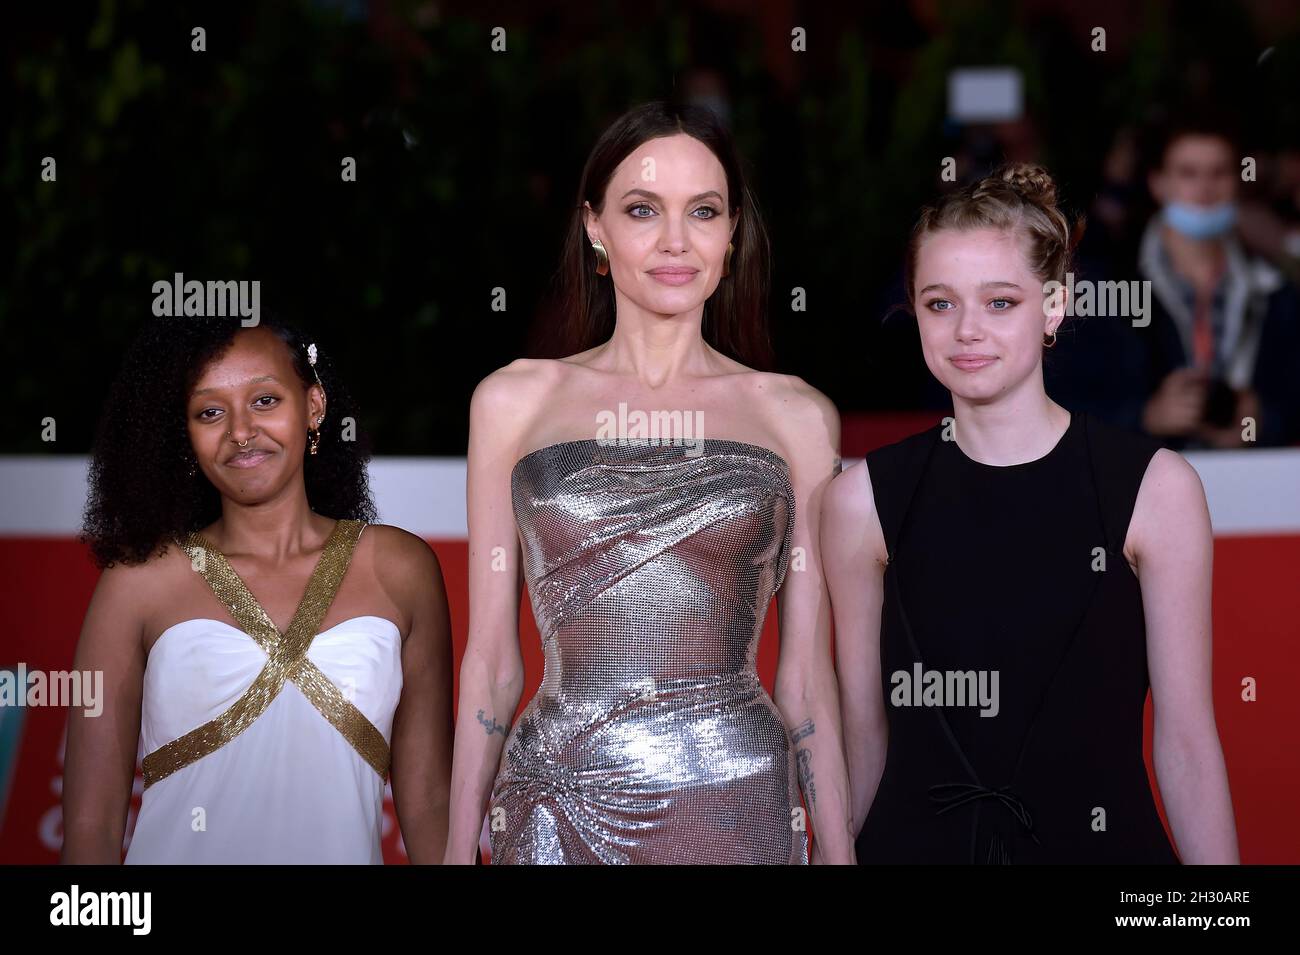 ROME, ITALY - OCTOBER 24 Zahara Marley Jolie-Pitt, Angelina Jolie ,Shiloh Jolie-Pitt,attends the red carpet of the movie 'Eternals' during the 16th Rome Film Fest 2021 on October 24, 2021 in Rome, Italy. Stock Photo